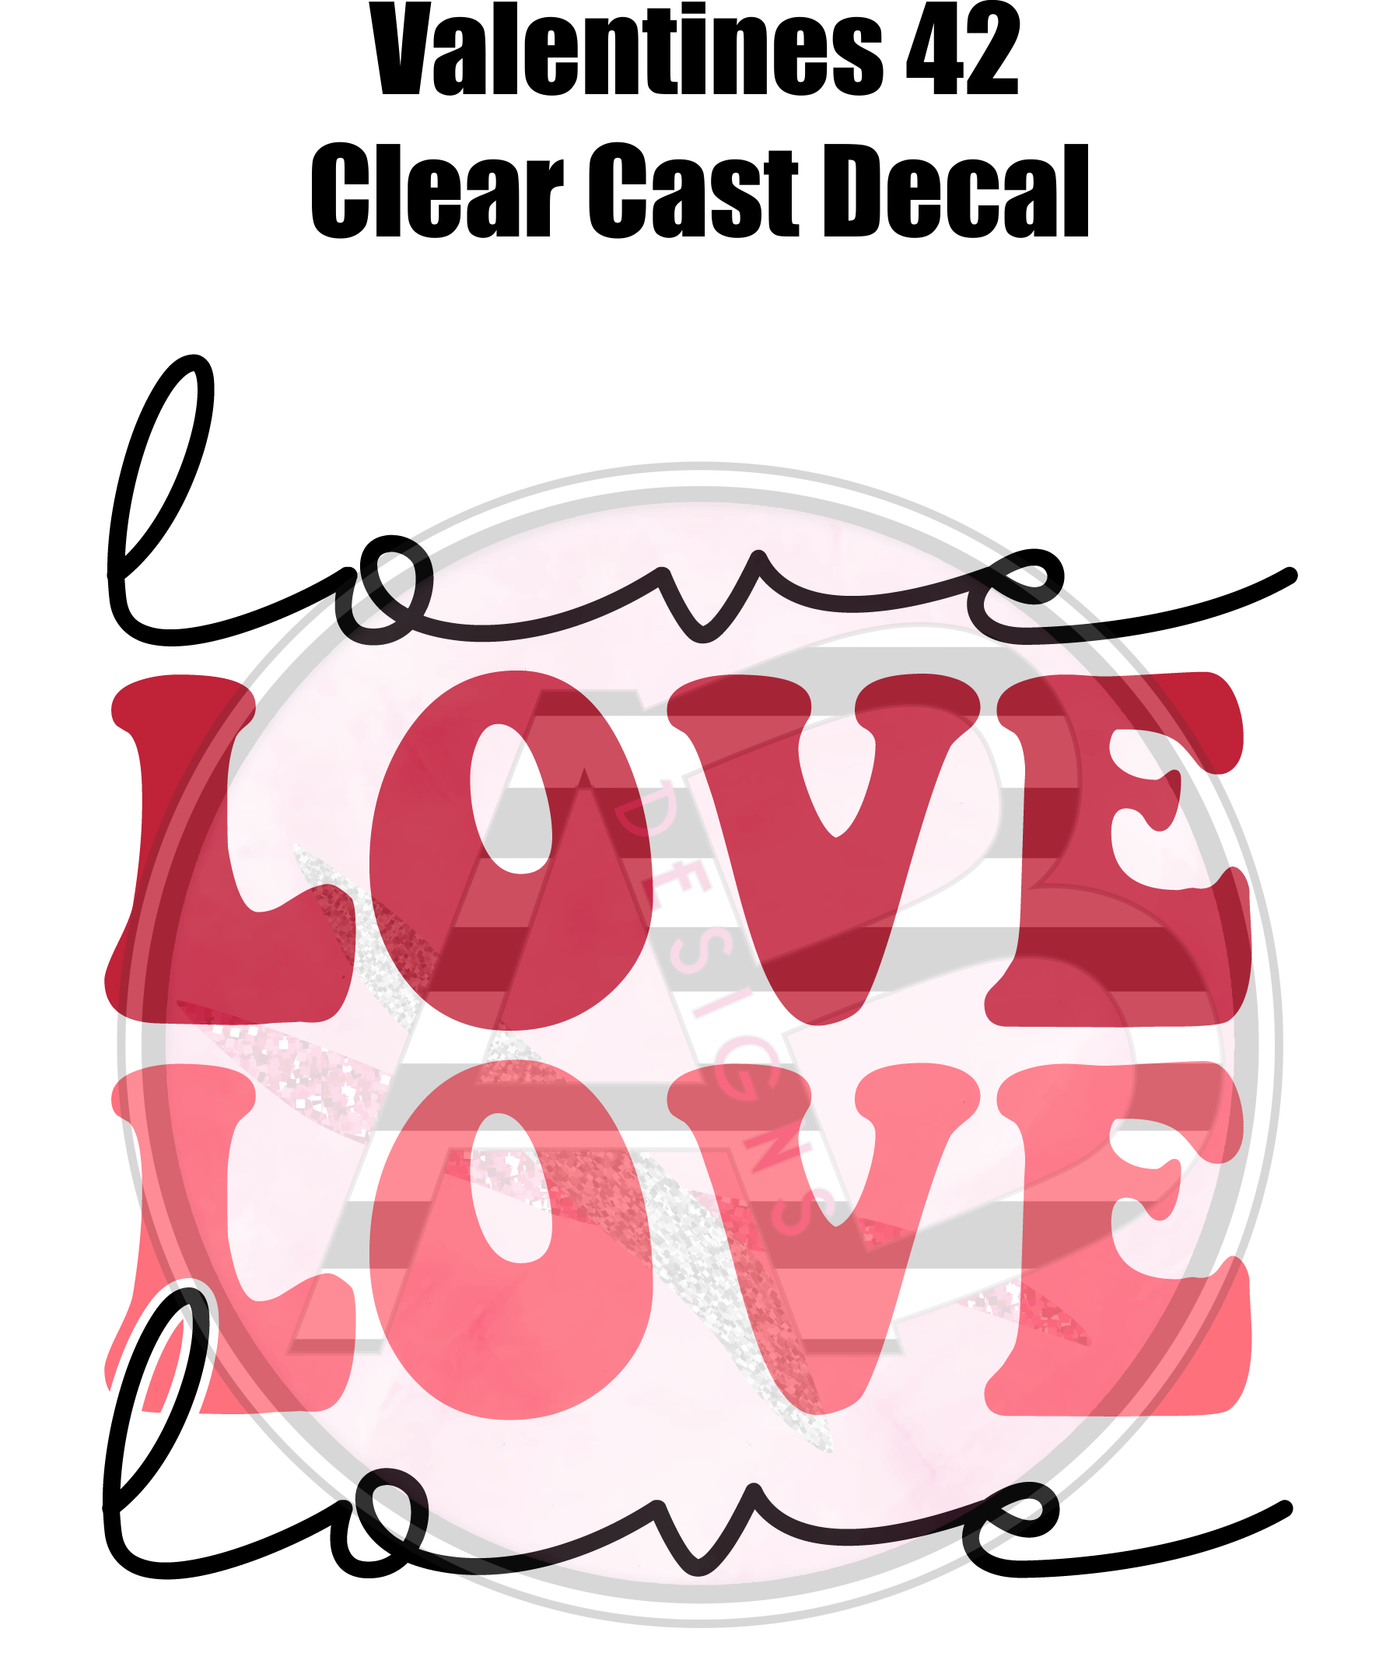 Valentines 42 - Clear Cast Decal